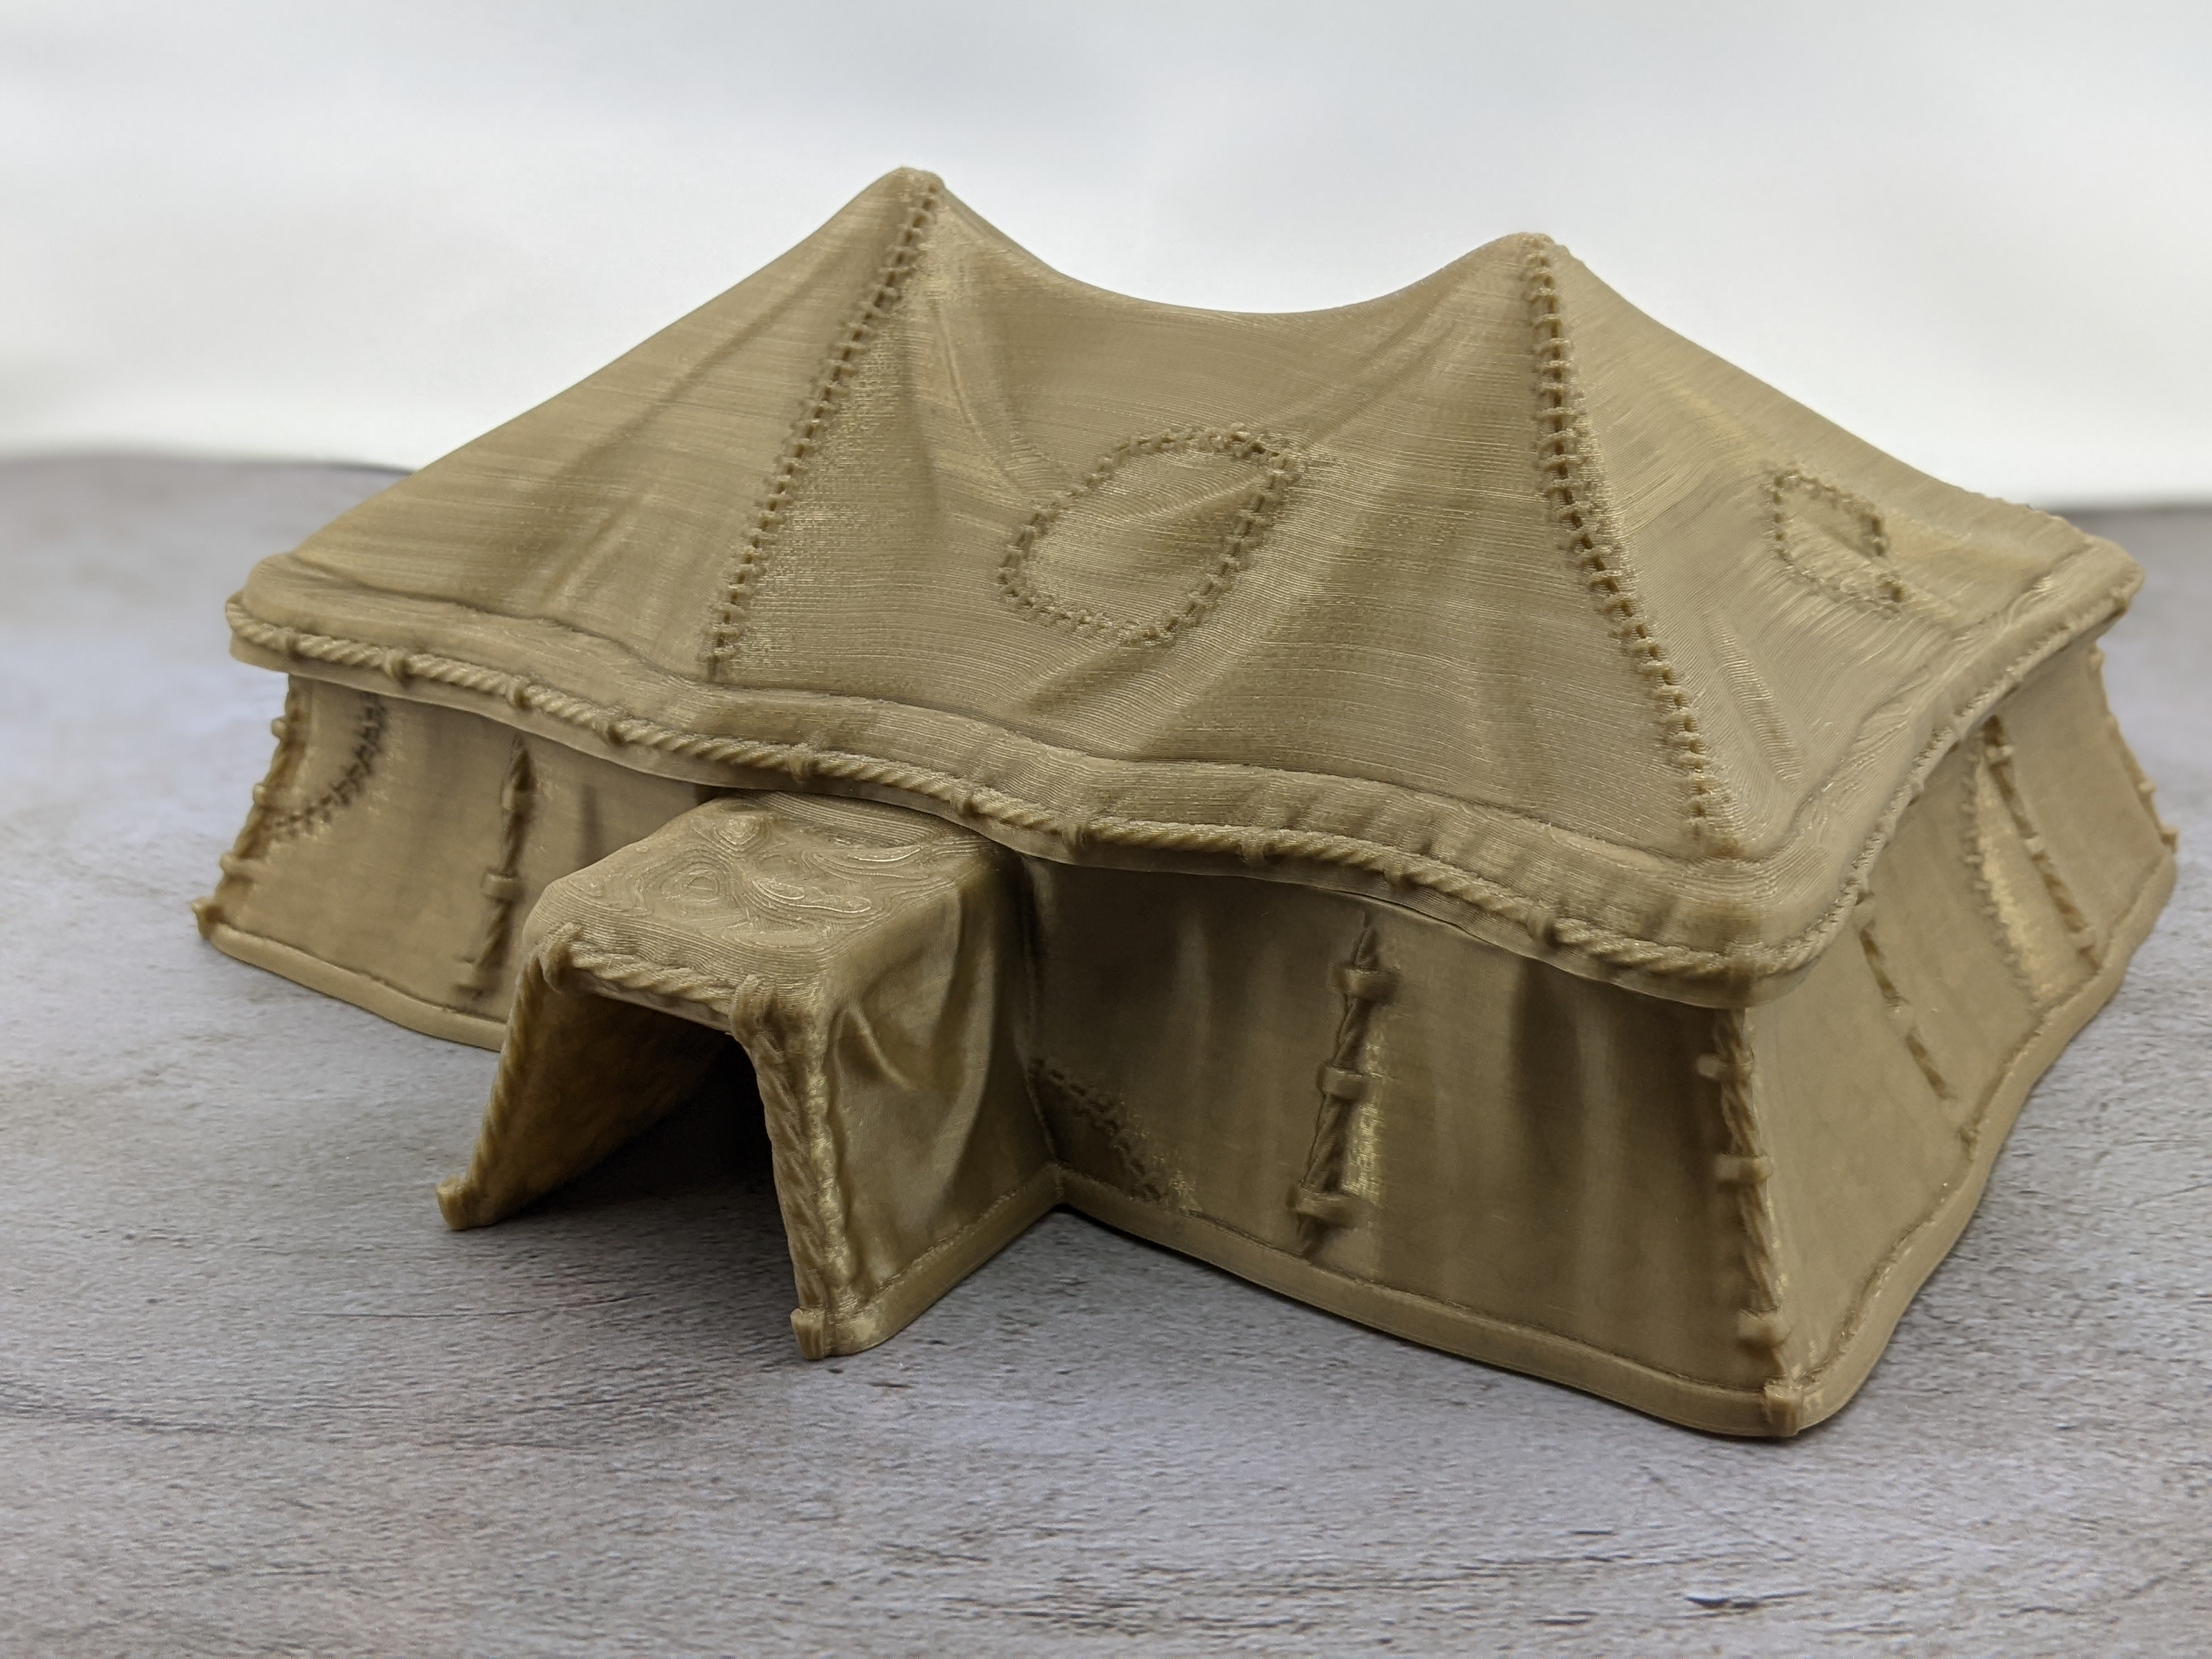 Grand Tent Terrain - Empire of Scorching Sands